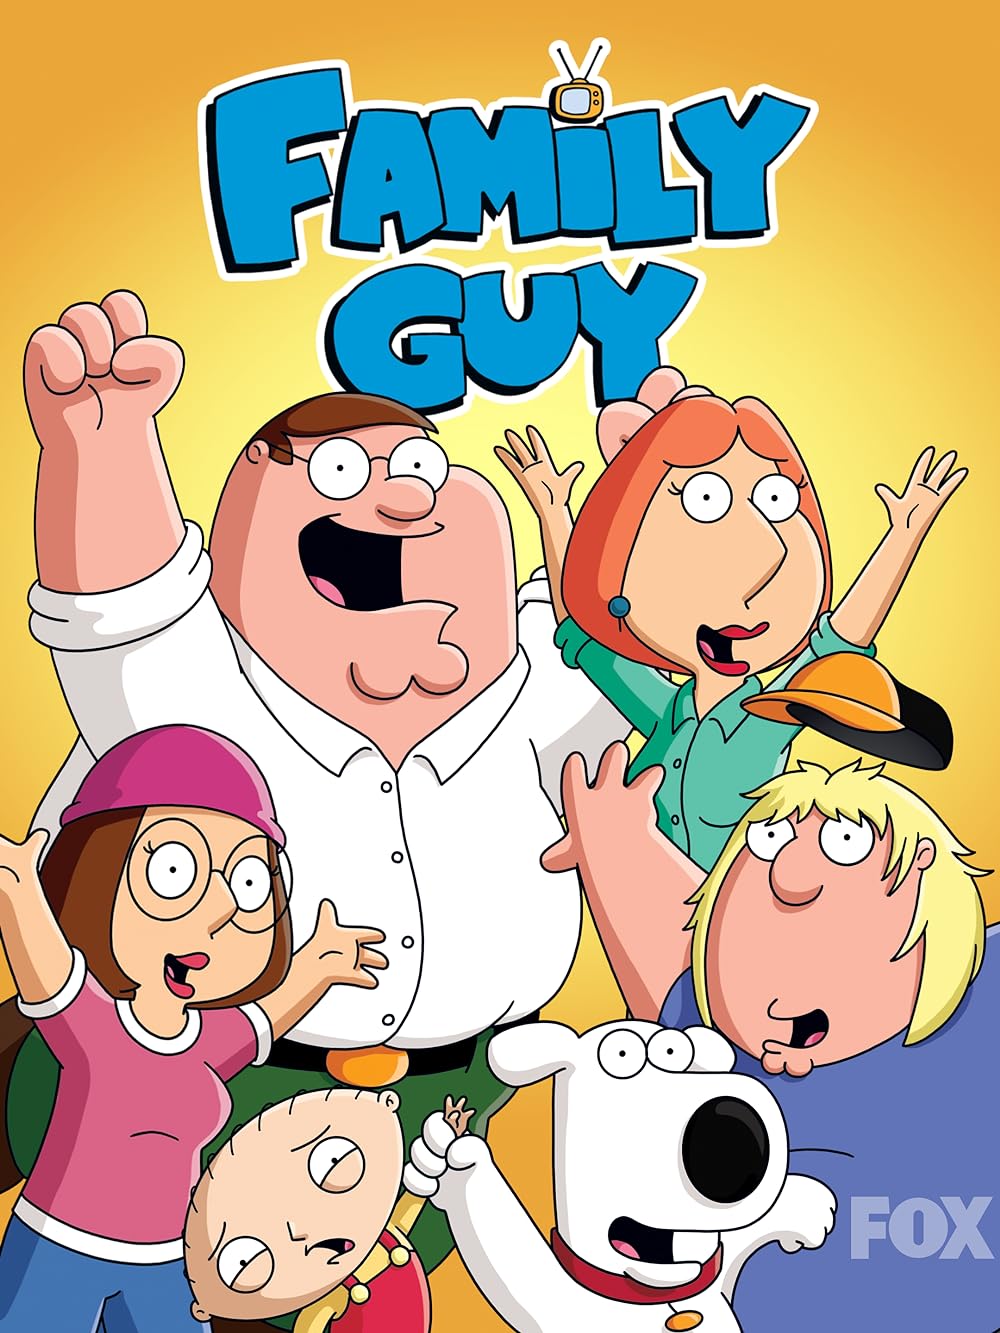 desmond hong recommends family guy sex movies pic